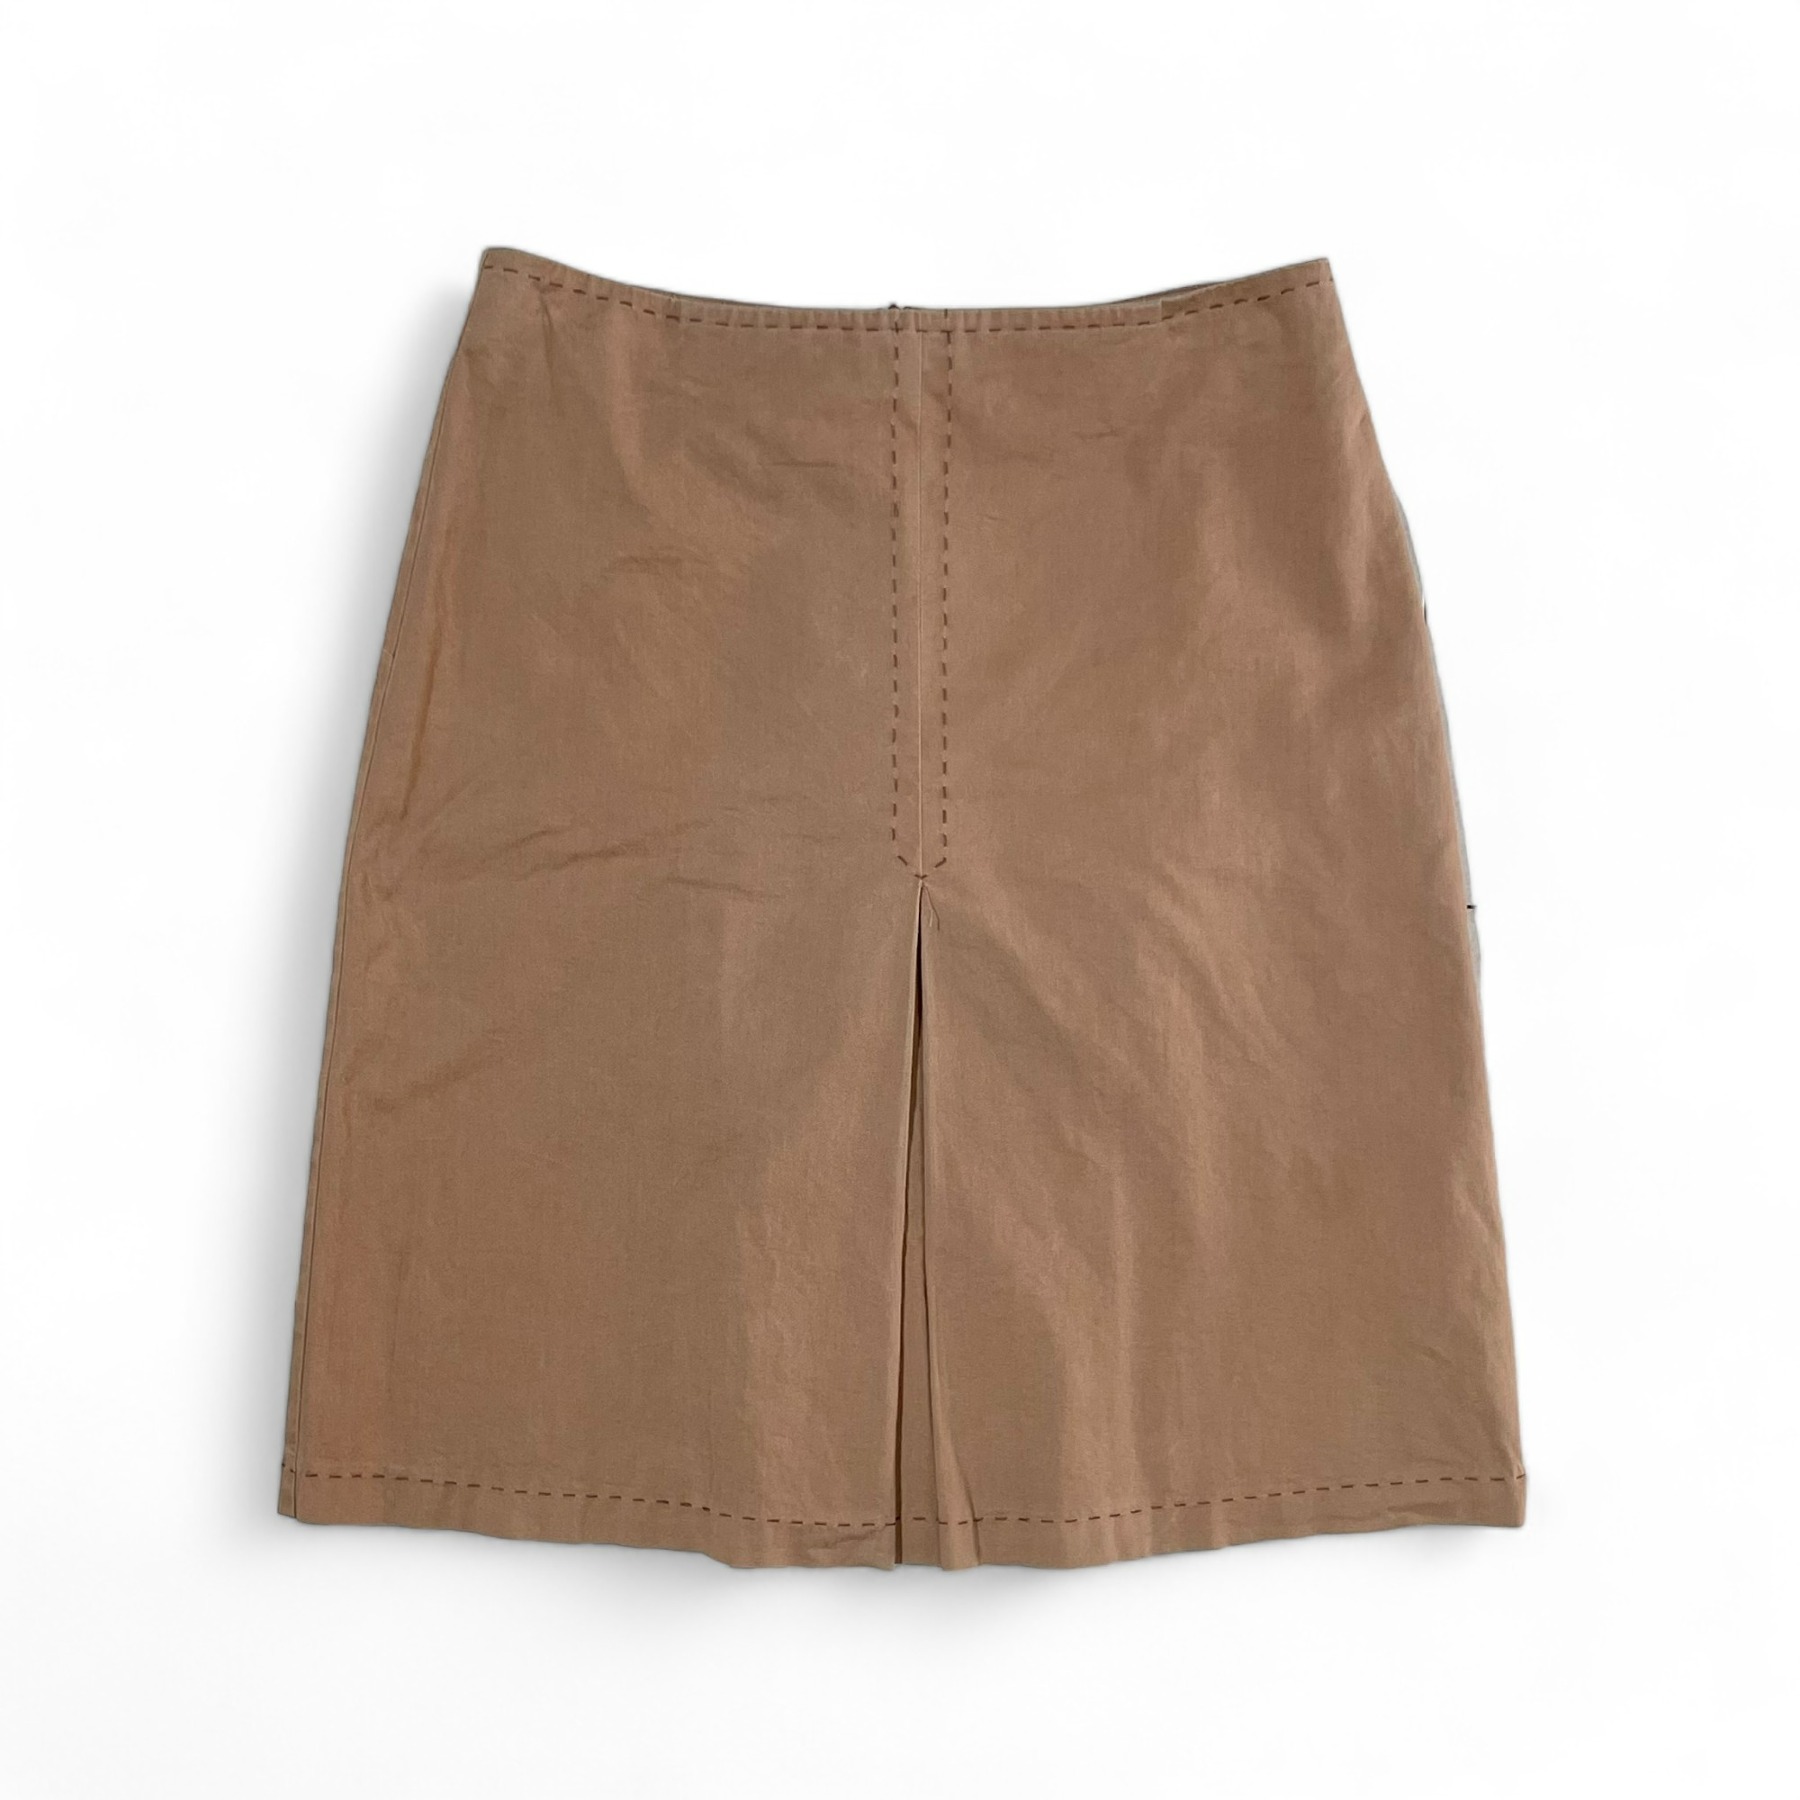 Max&amp;Co Skirt (Made in ITALY) - 27inch